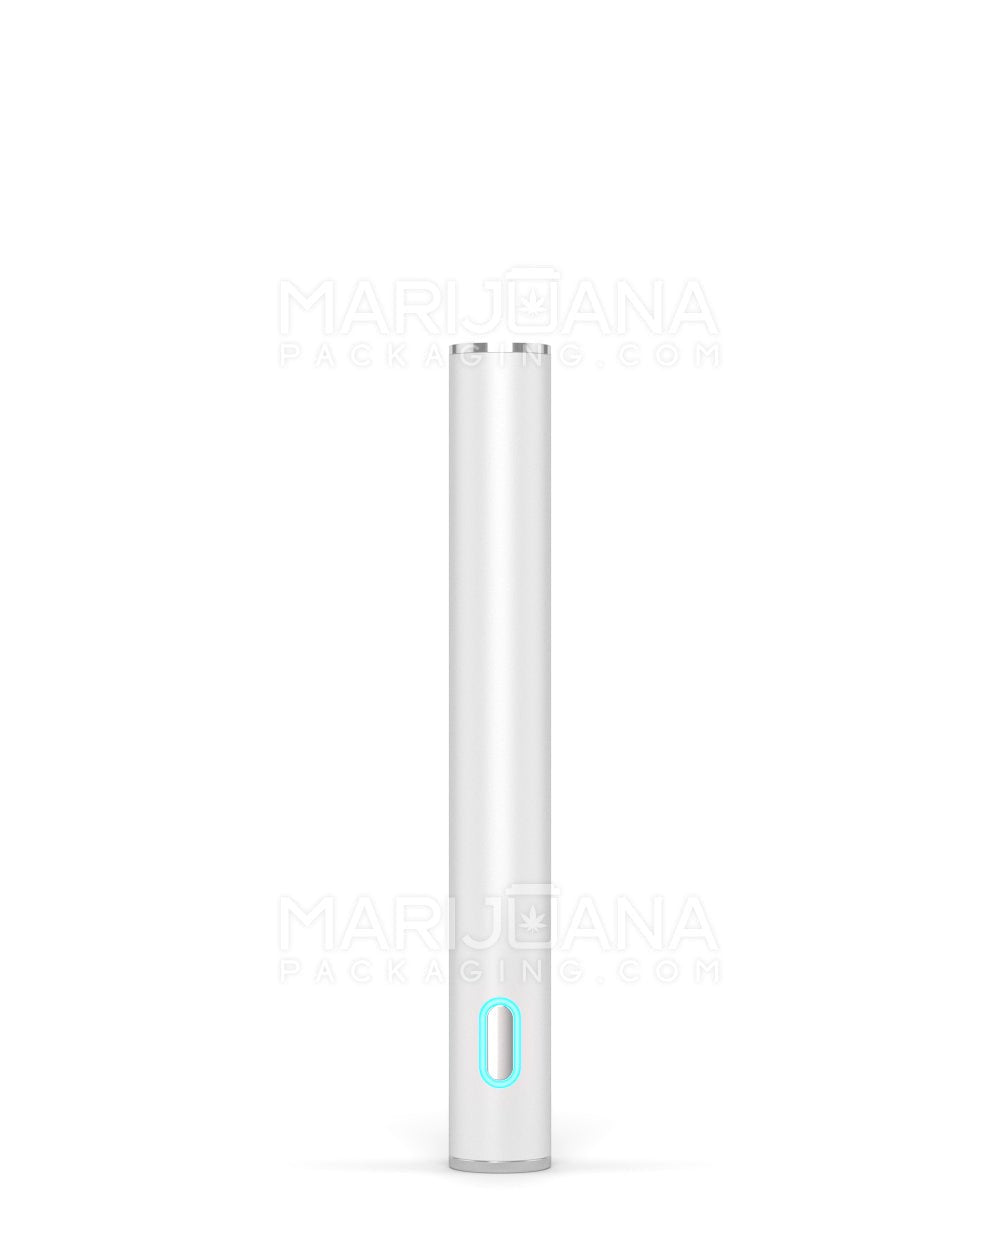 RAE | Instant Draw Activated Vape Battery | 320mAh - White - 640 Count - 1